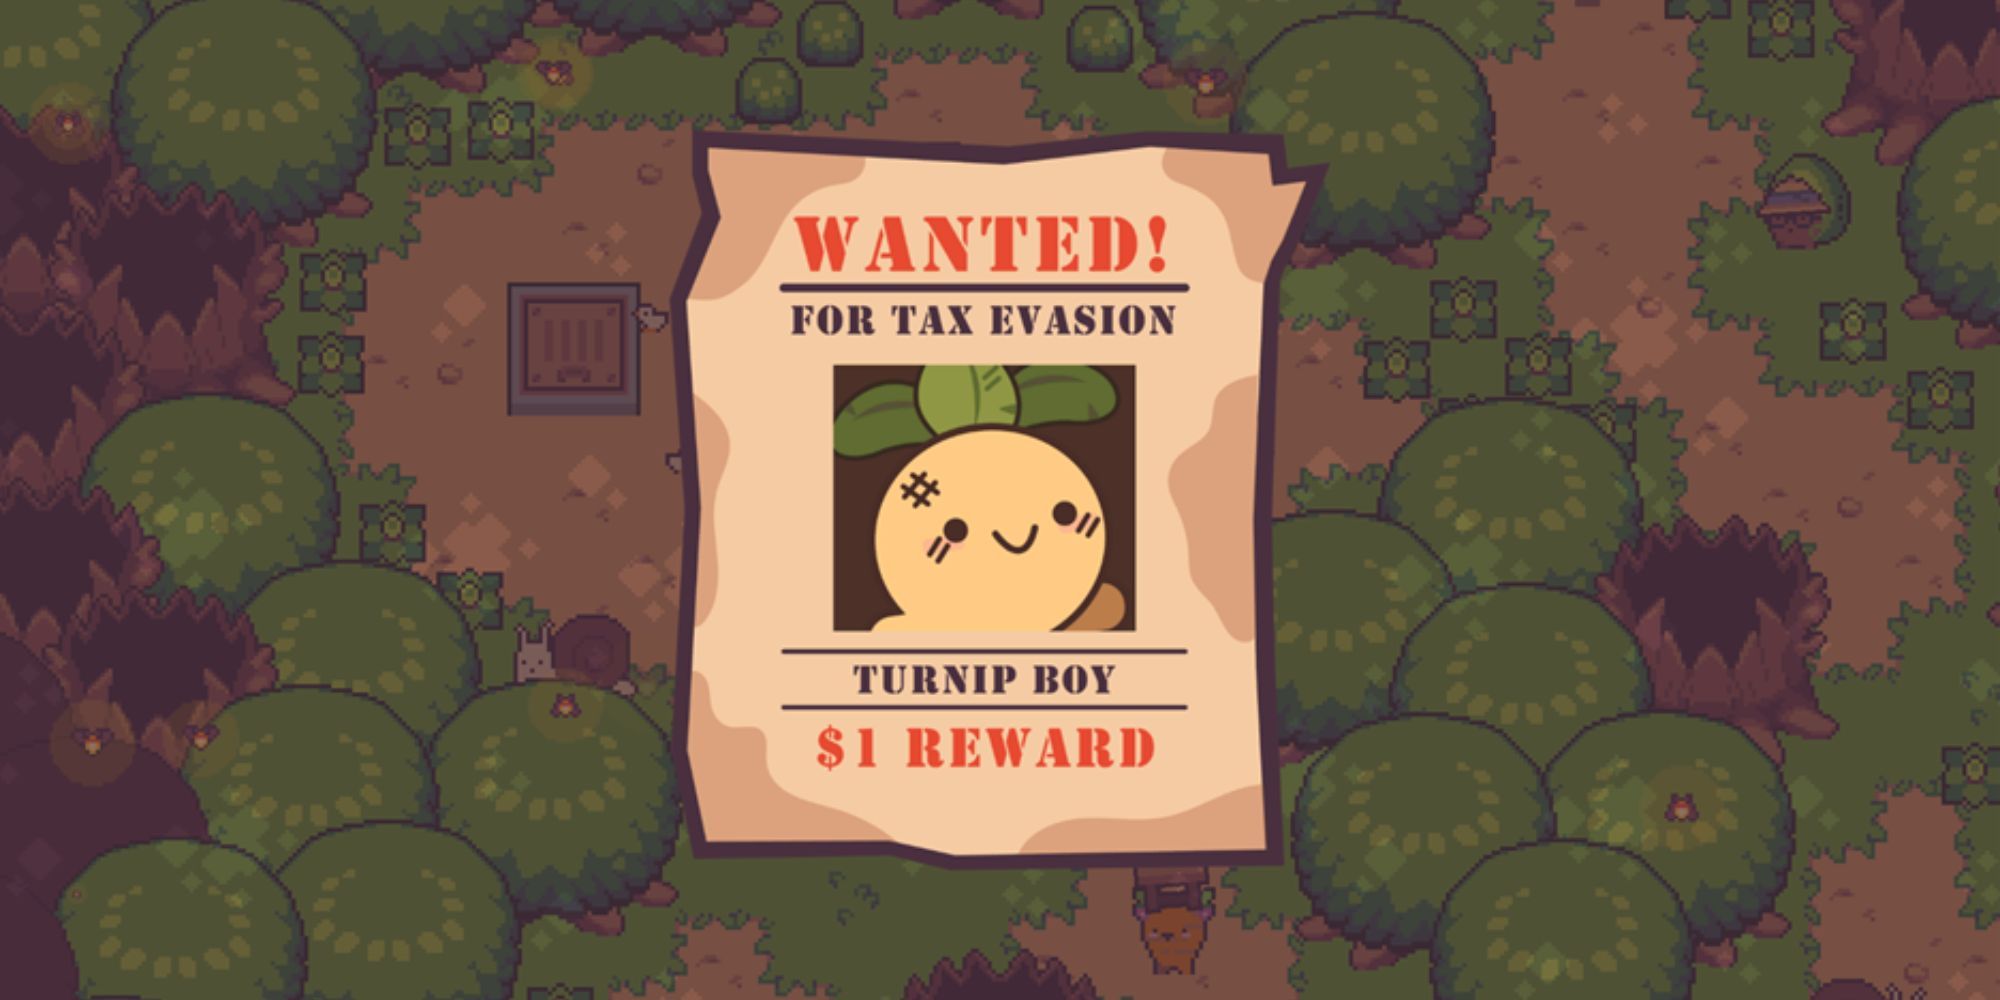 A wanted poster for Turnip Boy floats over a jungle